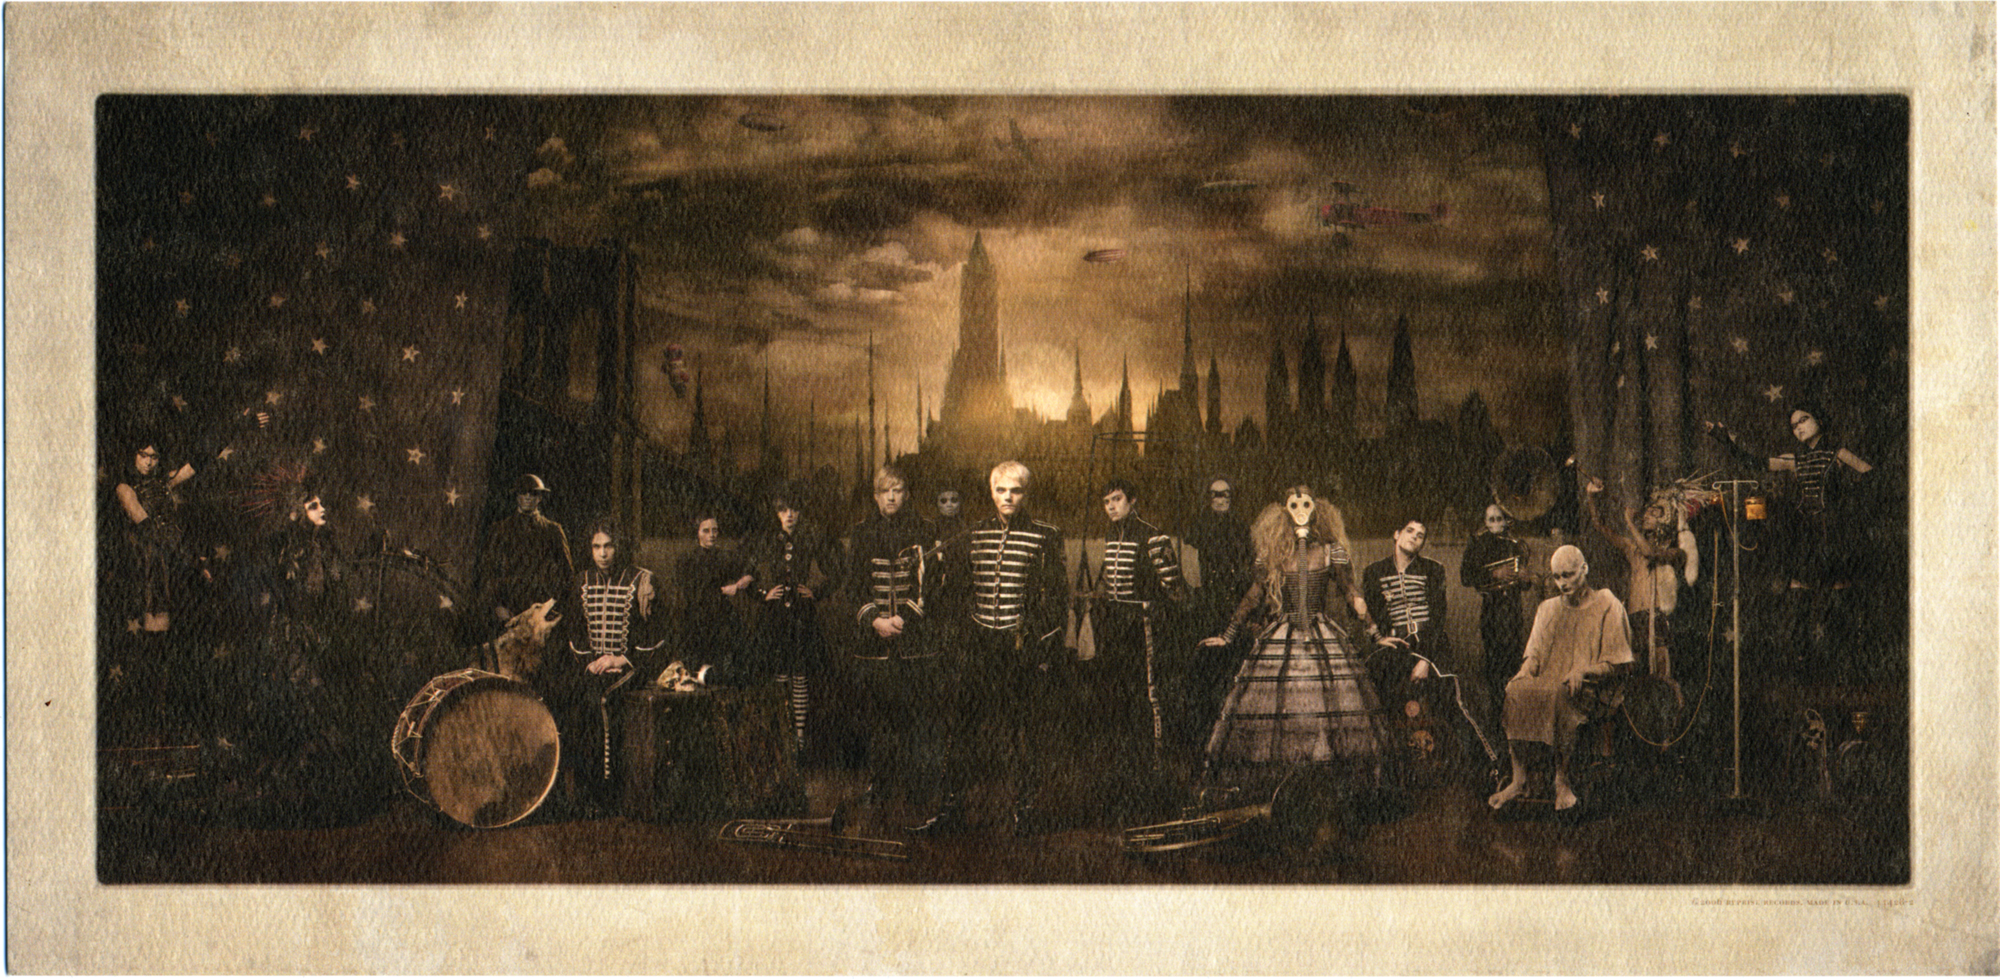 My Chemical Romance: Black Parade Campaign